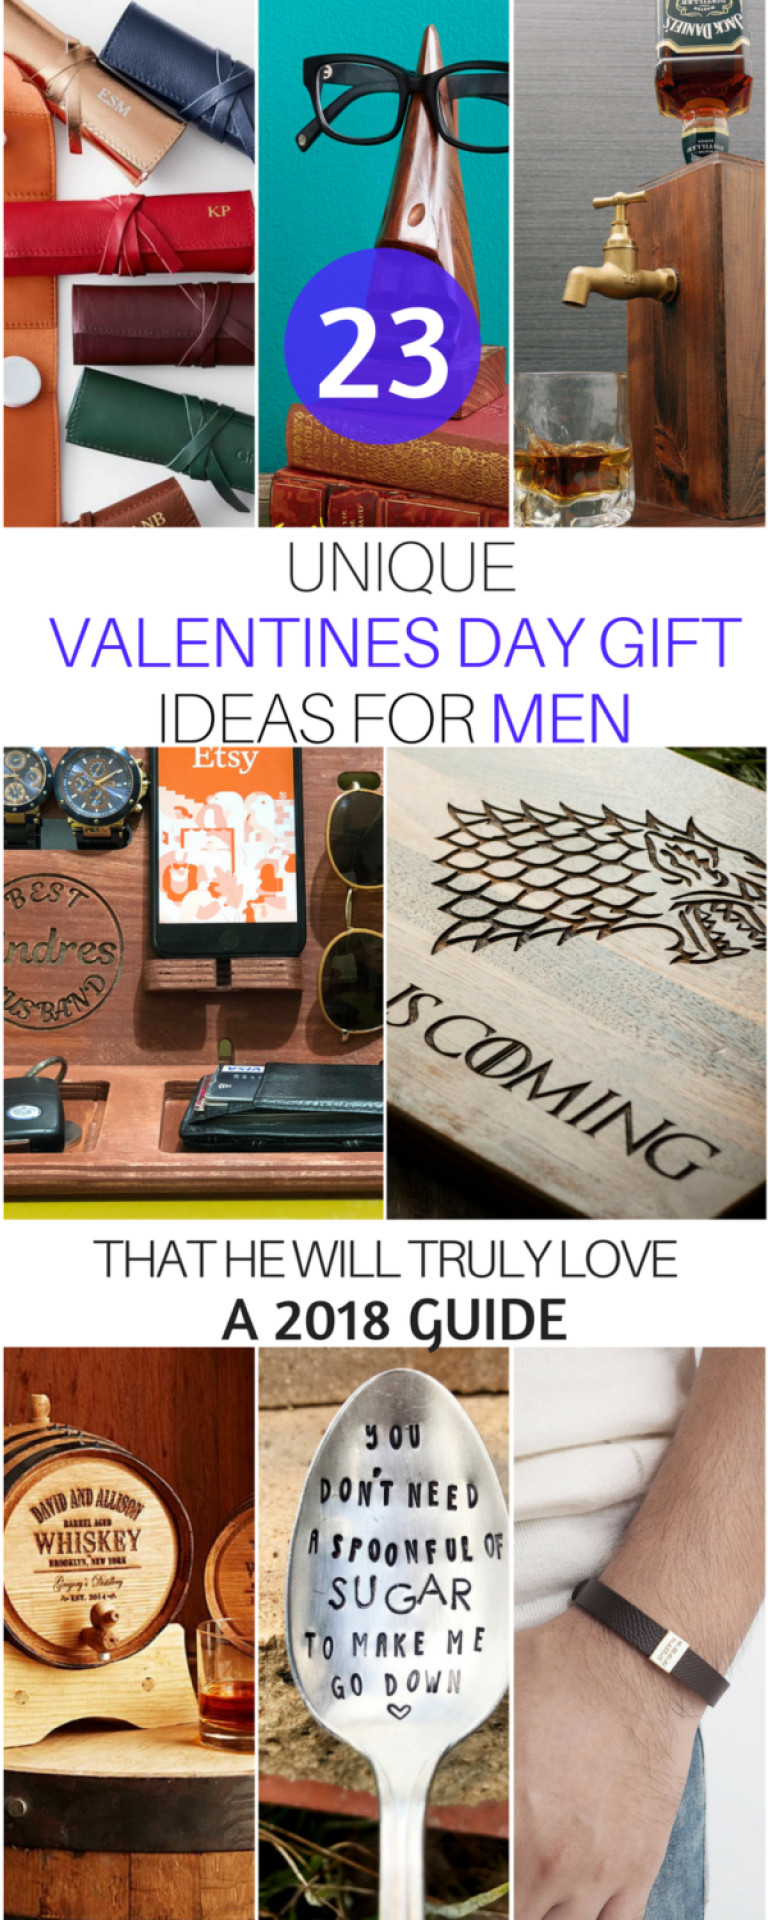 Valentines Gift Ideas Men
 24 Unique Gift Ideas for Men Who Have Everything 2020